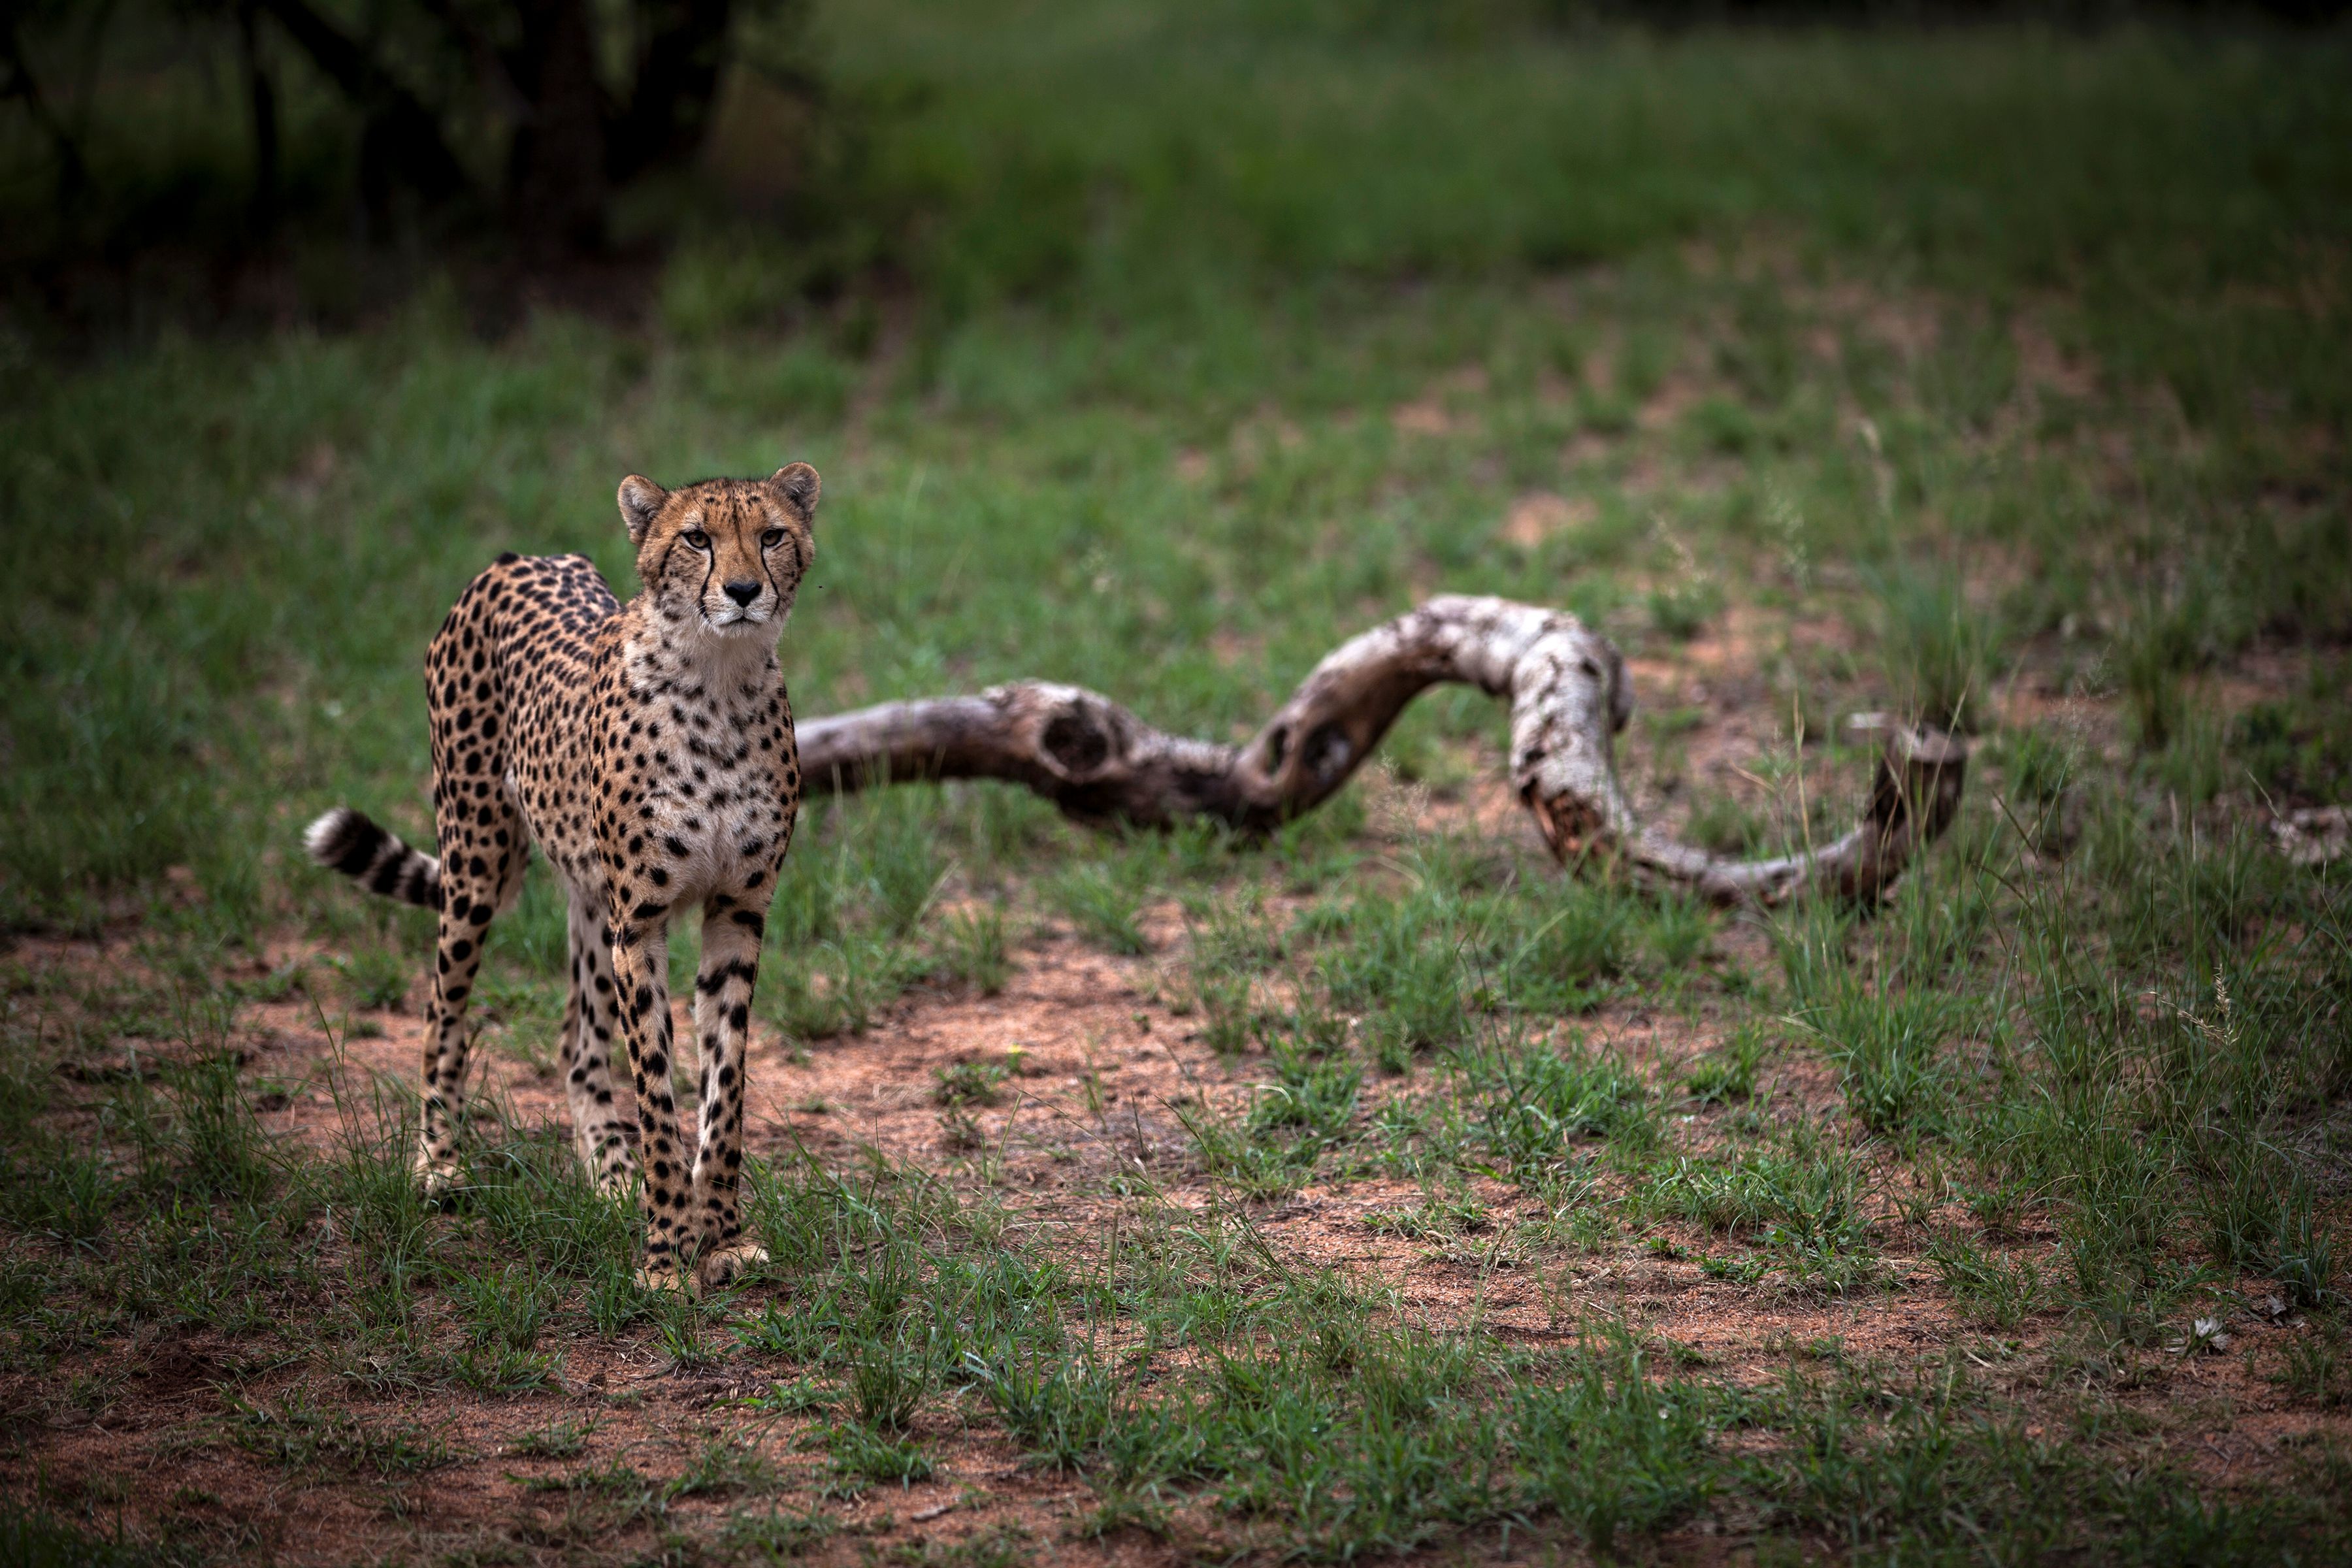 A juvenile male inside a closed camp at the Ann van Dyk Cheetah Centre in Hartbeespoort, South Africa